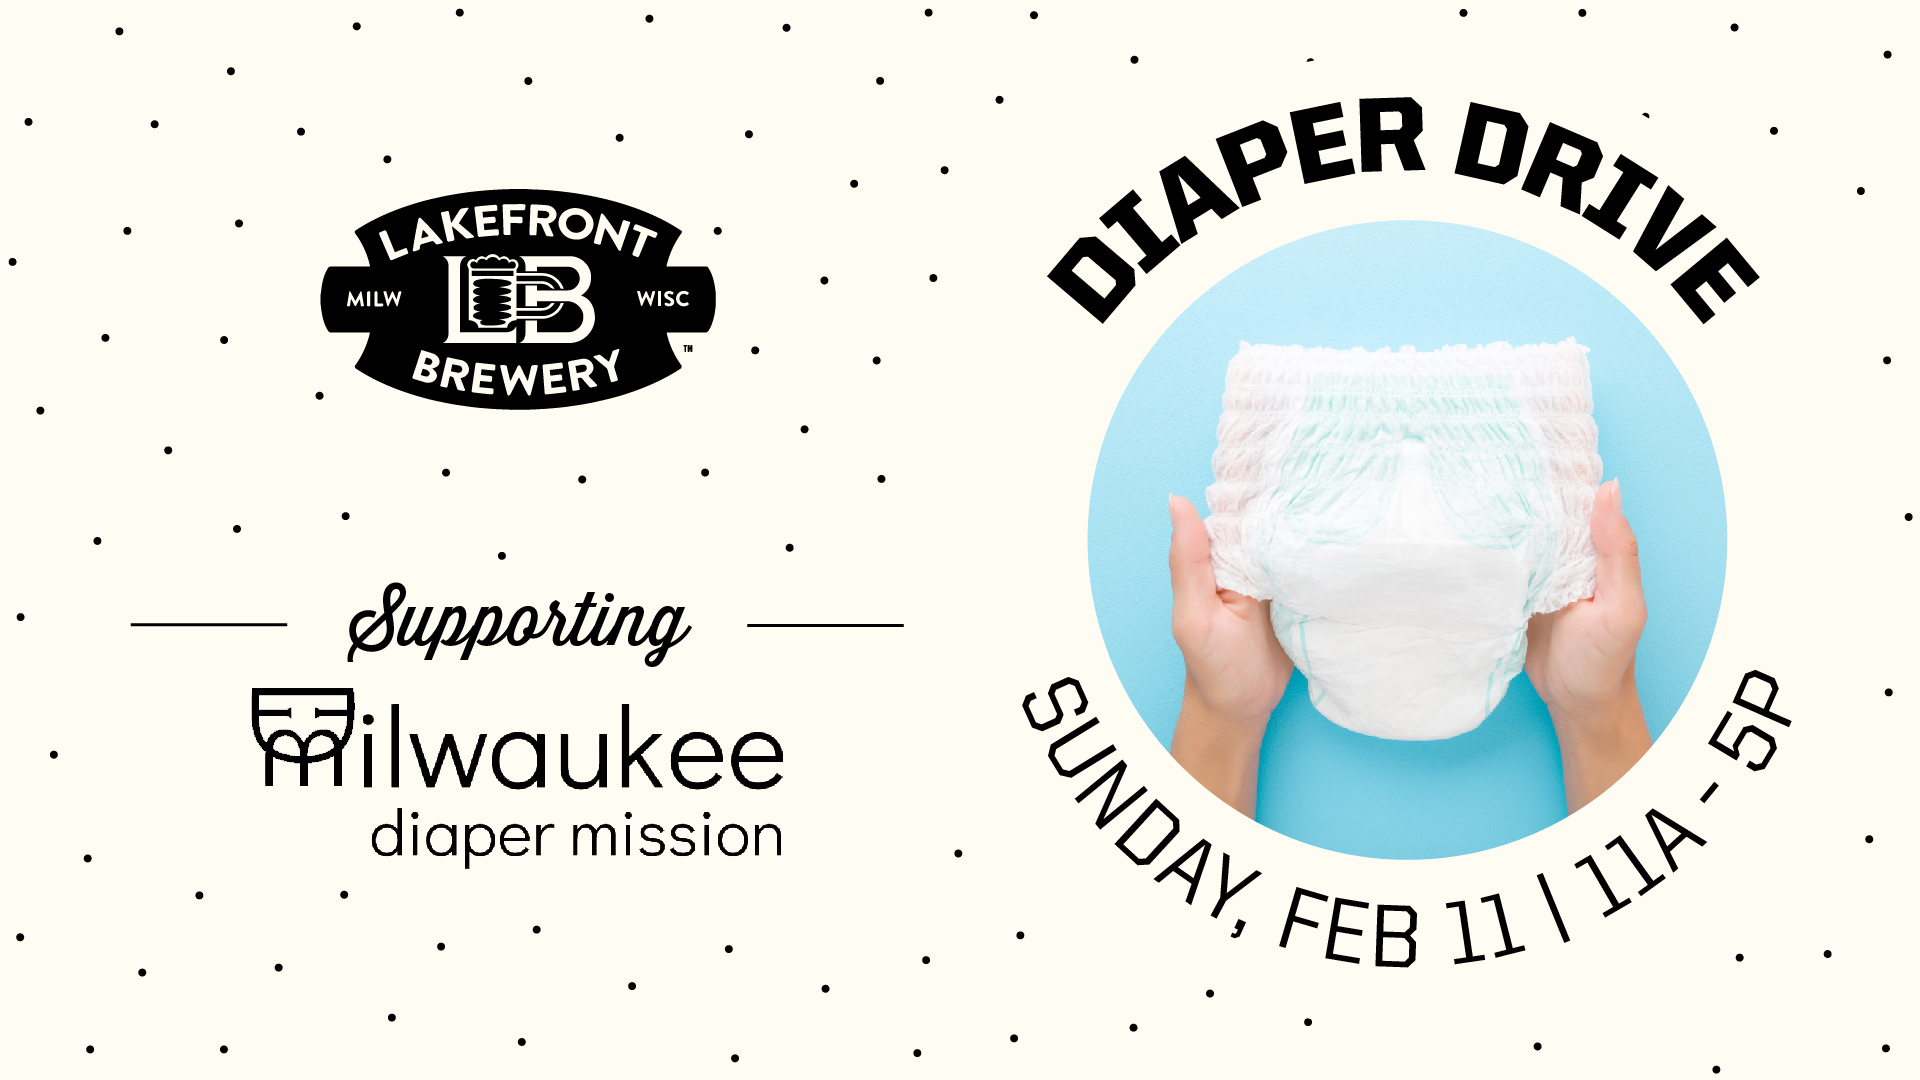 Milwaukee Diaper Mission Returns to Lakefront Brewery for Diaper Drive